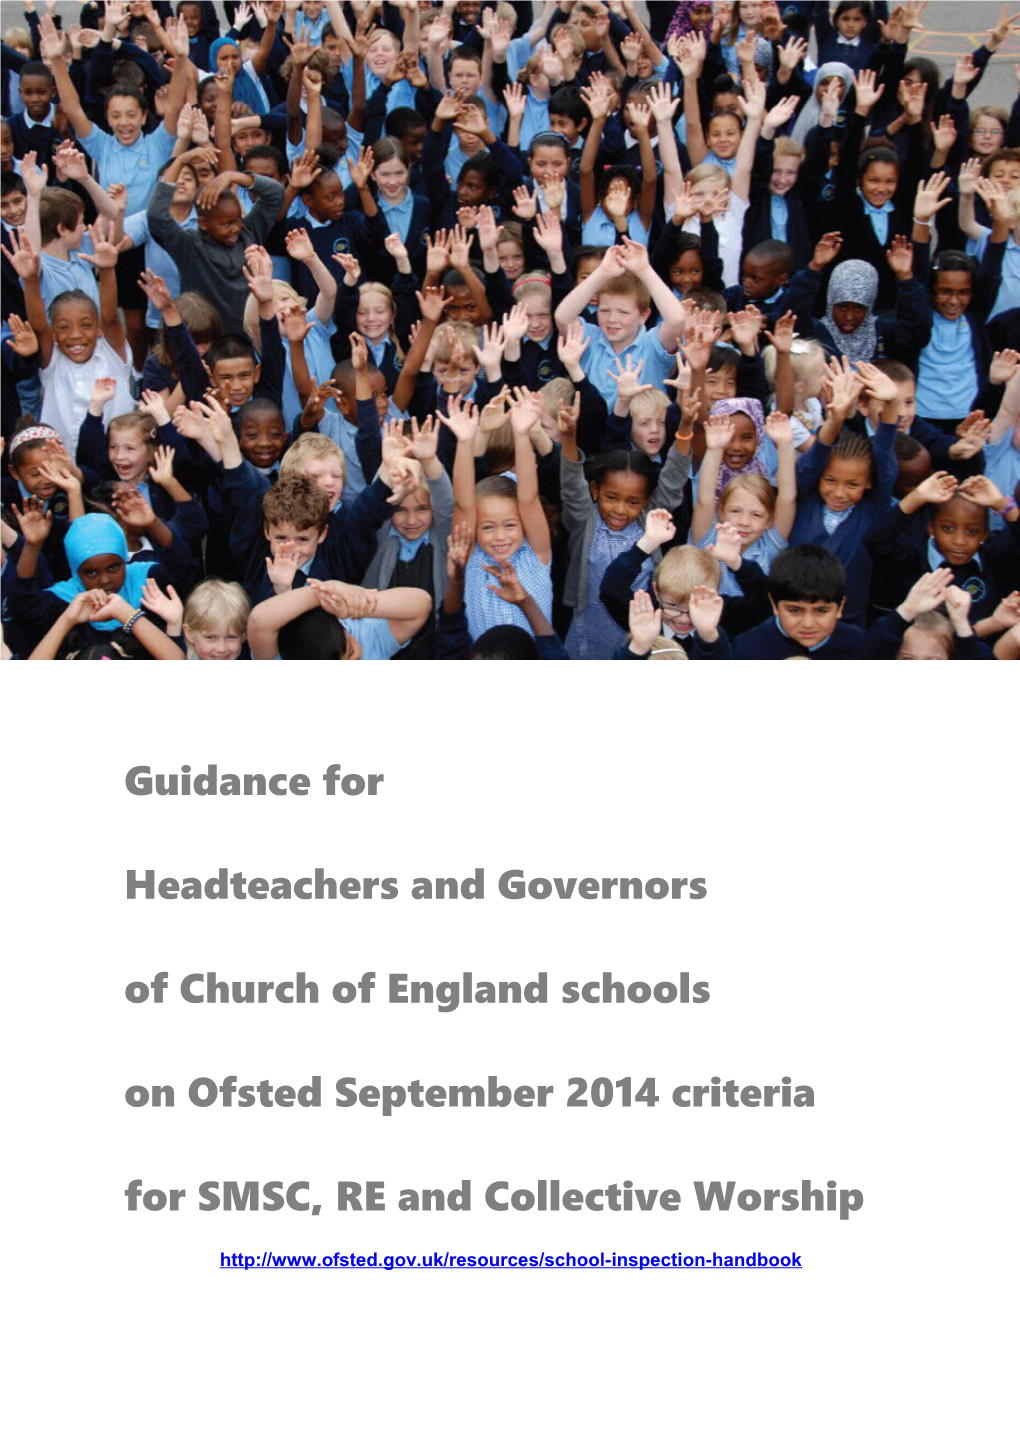 Headteachers and Governors